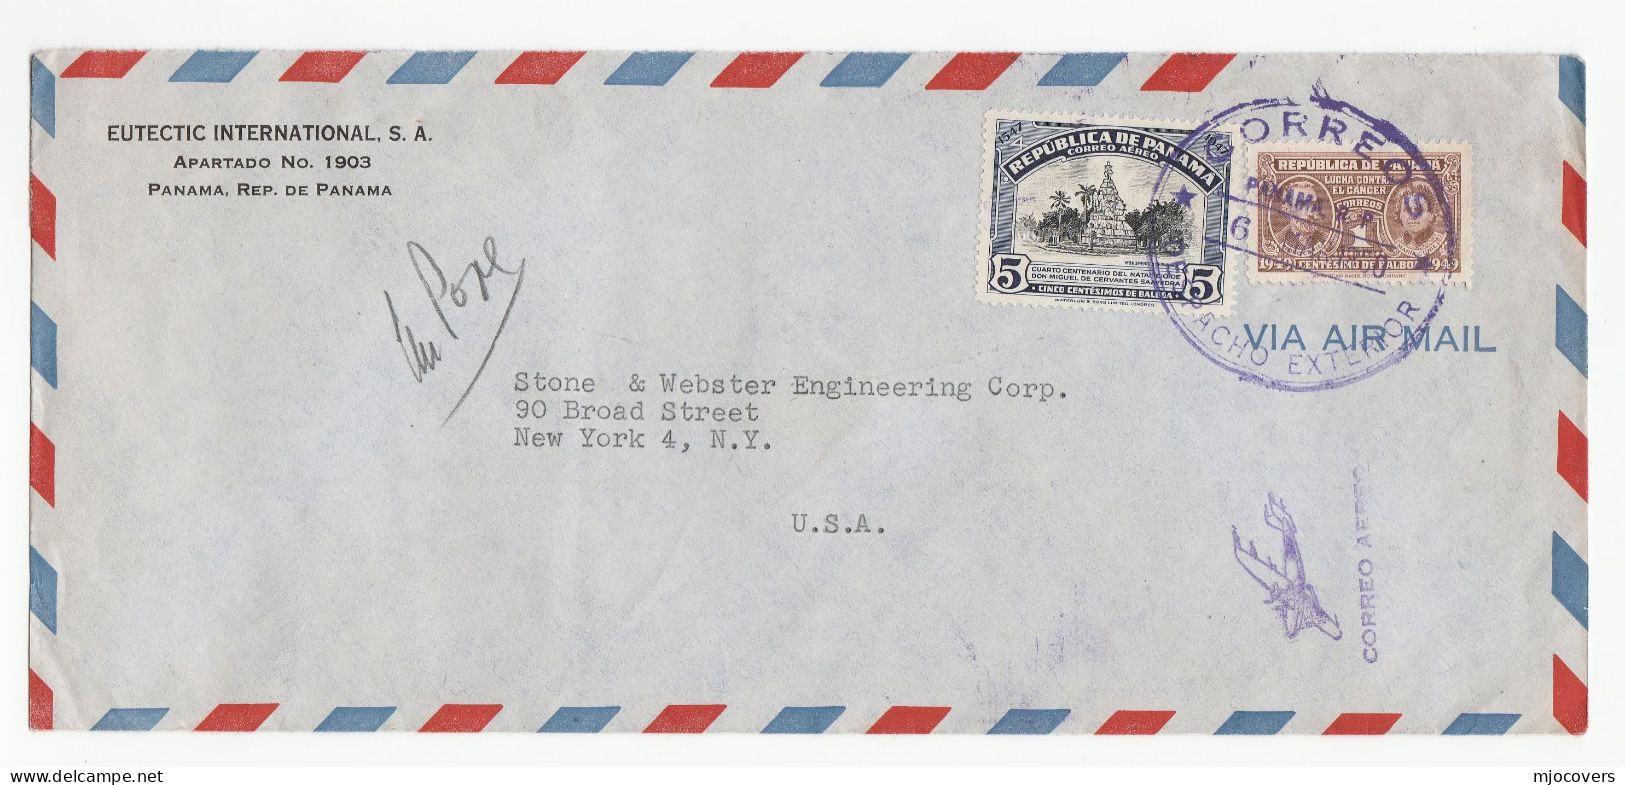 CANCER  - 1950 Panama COVER  Marie CURIE Anti Cancer Stamps Air Mail To USA Chemistry Health Medicine - Maladies